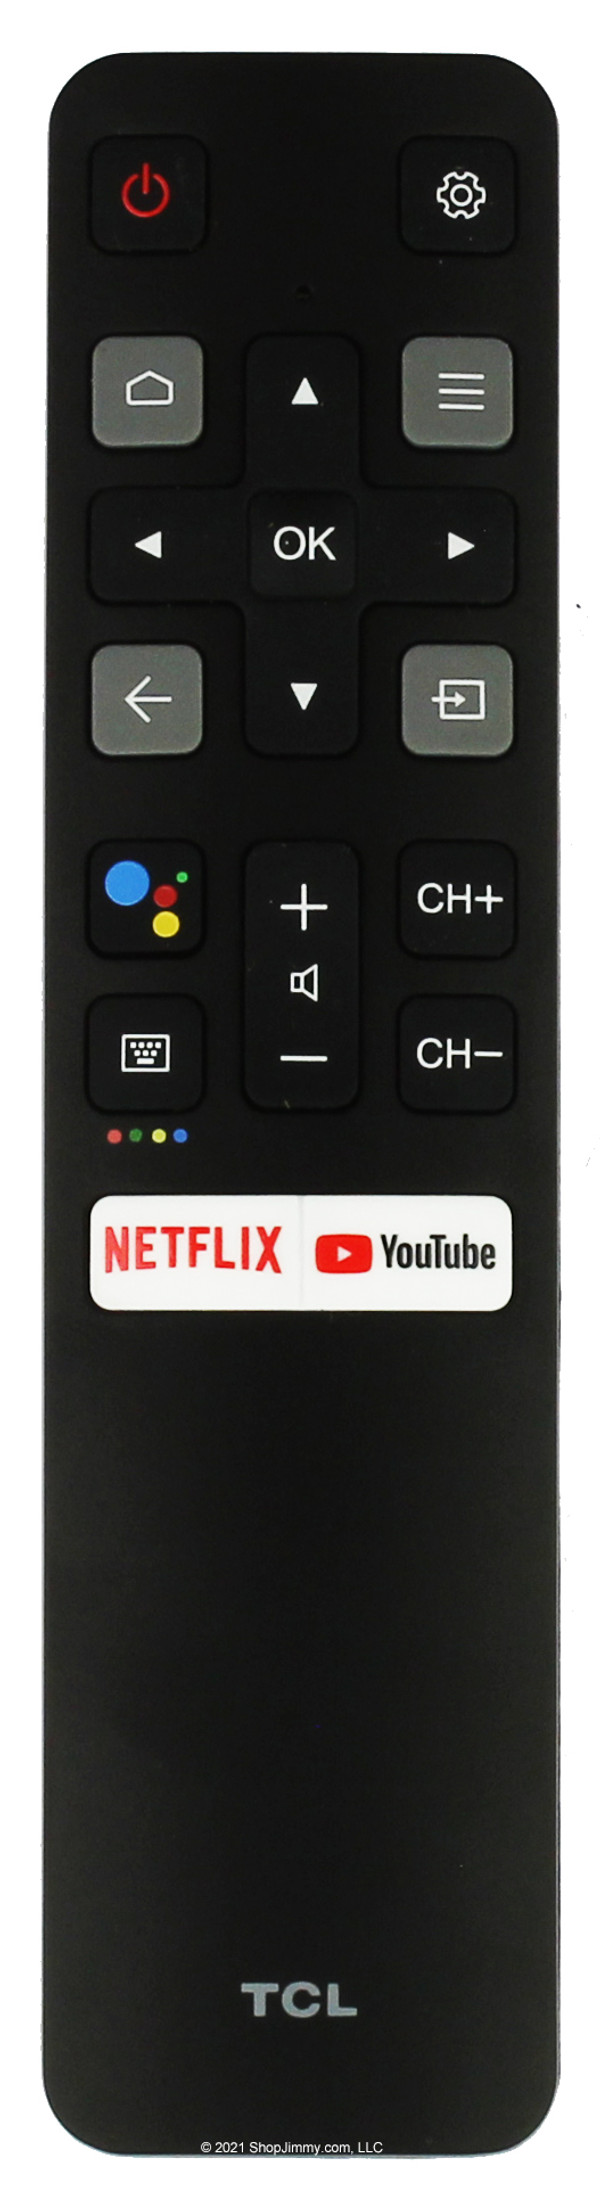 06-BTZNYY-SRC802V for TCL 50S434 55S434 65S434 Remote Control w/ Netflix Youtube--New